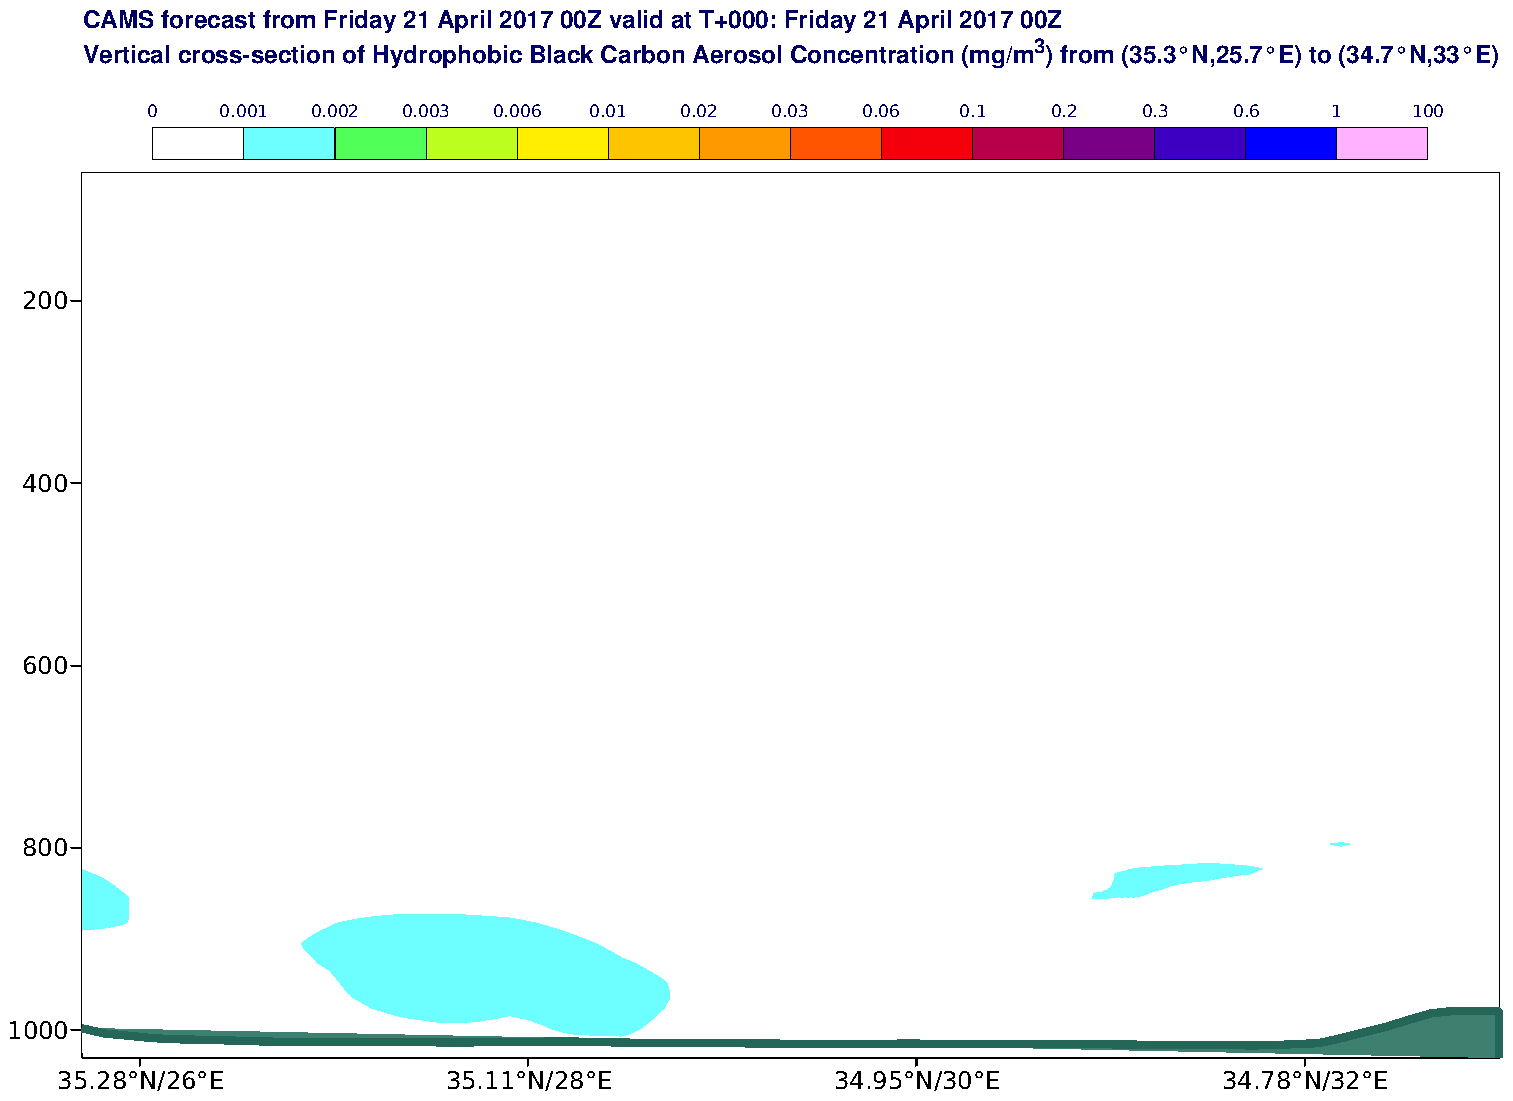 Vertical cross-section of Hydrophobic Black Carbon Aerosol Concentration (mg/m3) valid at T0 - 2017-04-21 00:00